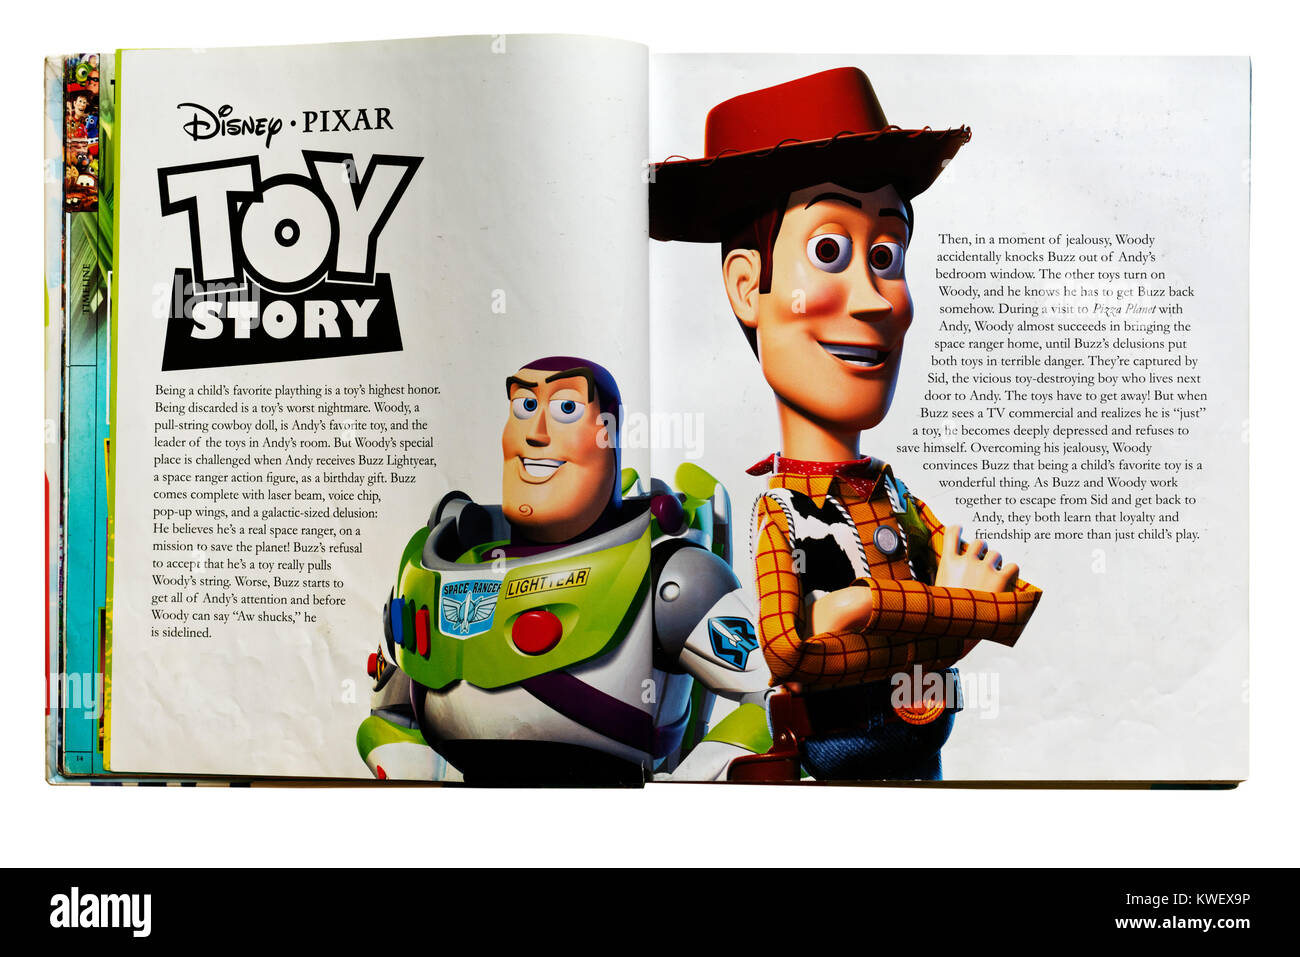 Pixar characters Woody and Buzz Lightyear from the film Toy Story in an Pixar Character Guide Stock Photo